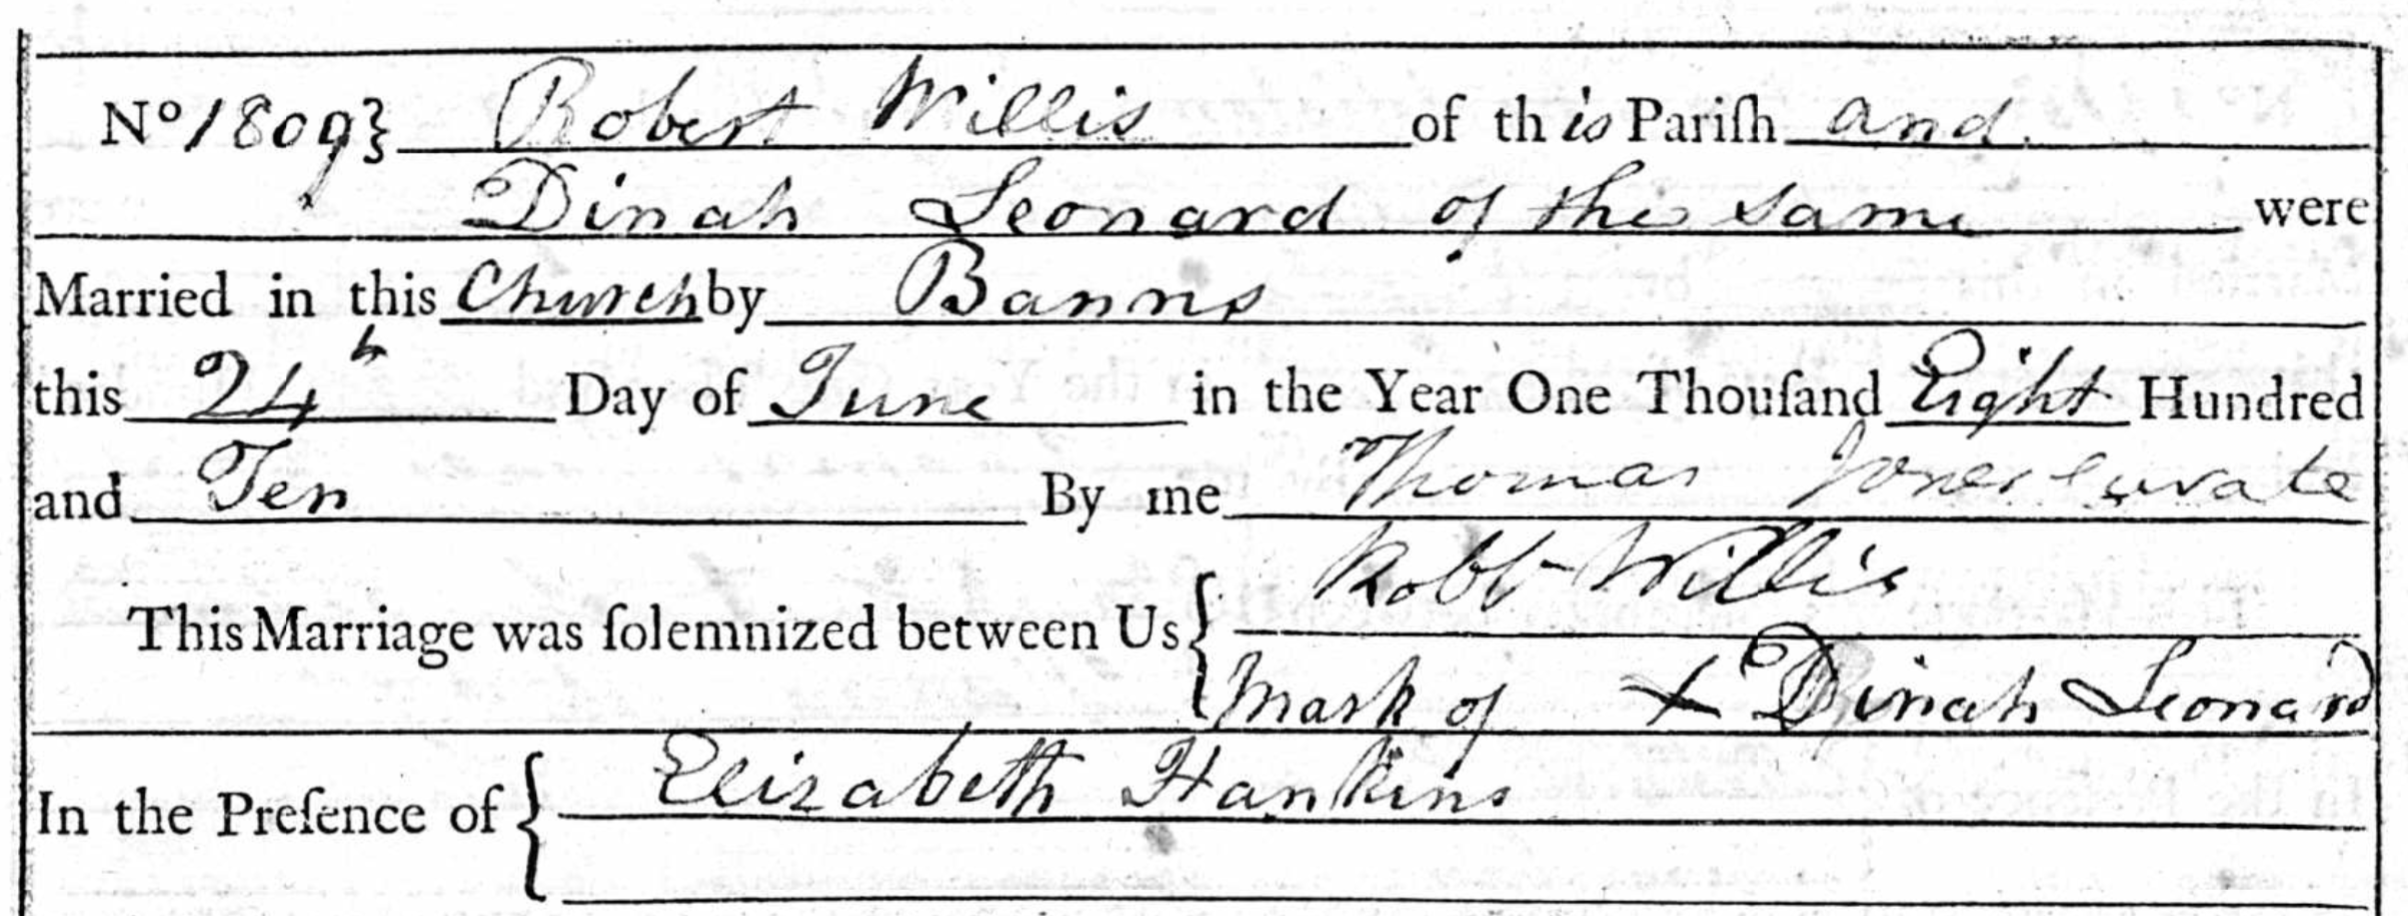 Figure 1: Marriage Register Entry for Robert Willis and Dinah Leonard